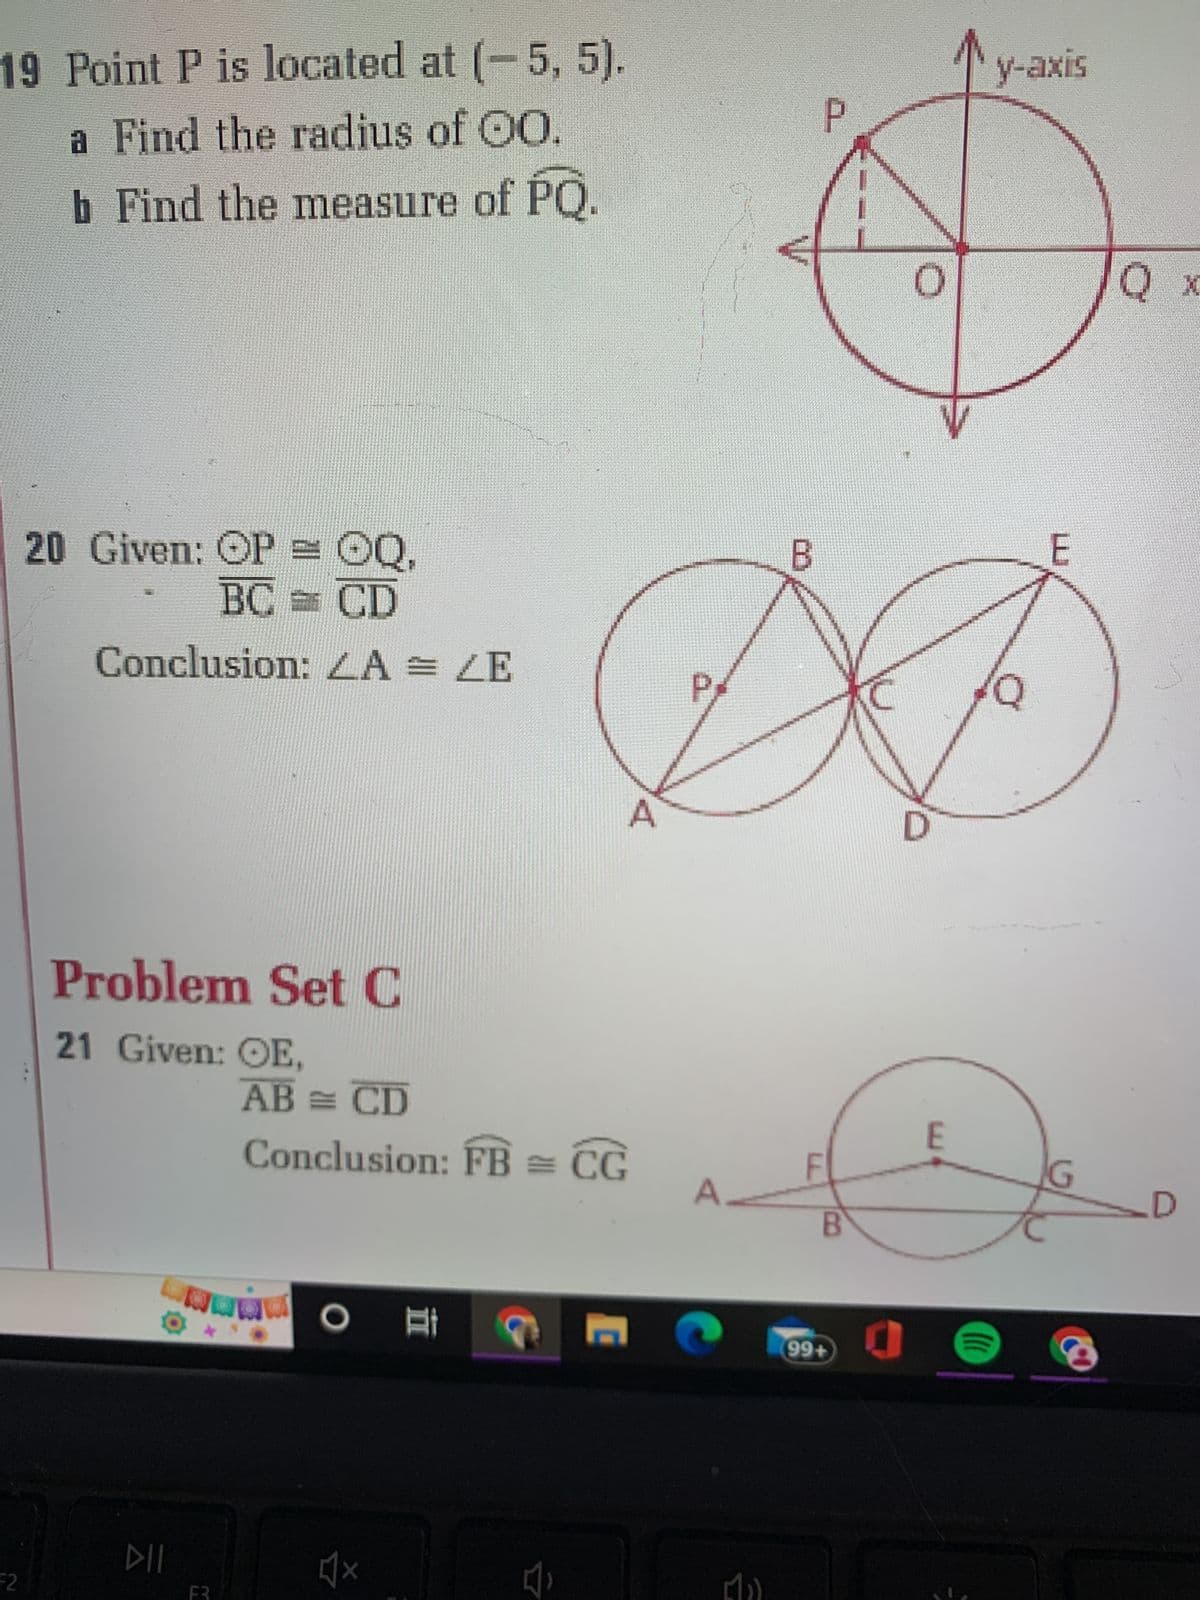 19 Point P is located at (-5, 5).
a Find the radius of 00.
b Find the measure of PQ.
F2
12
20 Given: OP = OQ,
BC = CD
Conclusion: LA = LE
Problem Set C
21 Given: OE,
DII
F3
AB = CD
Conclusion: FB = CG
x
18
C
A
B
P
B
99+
C
0
E
(((
y-axis
E
Q x